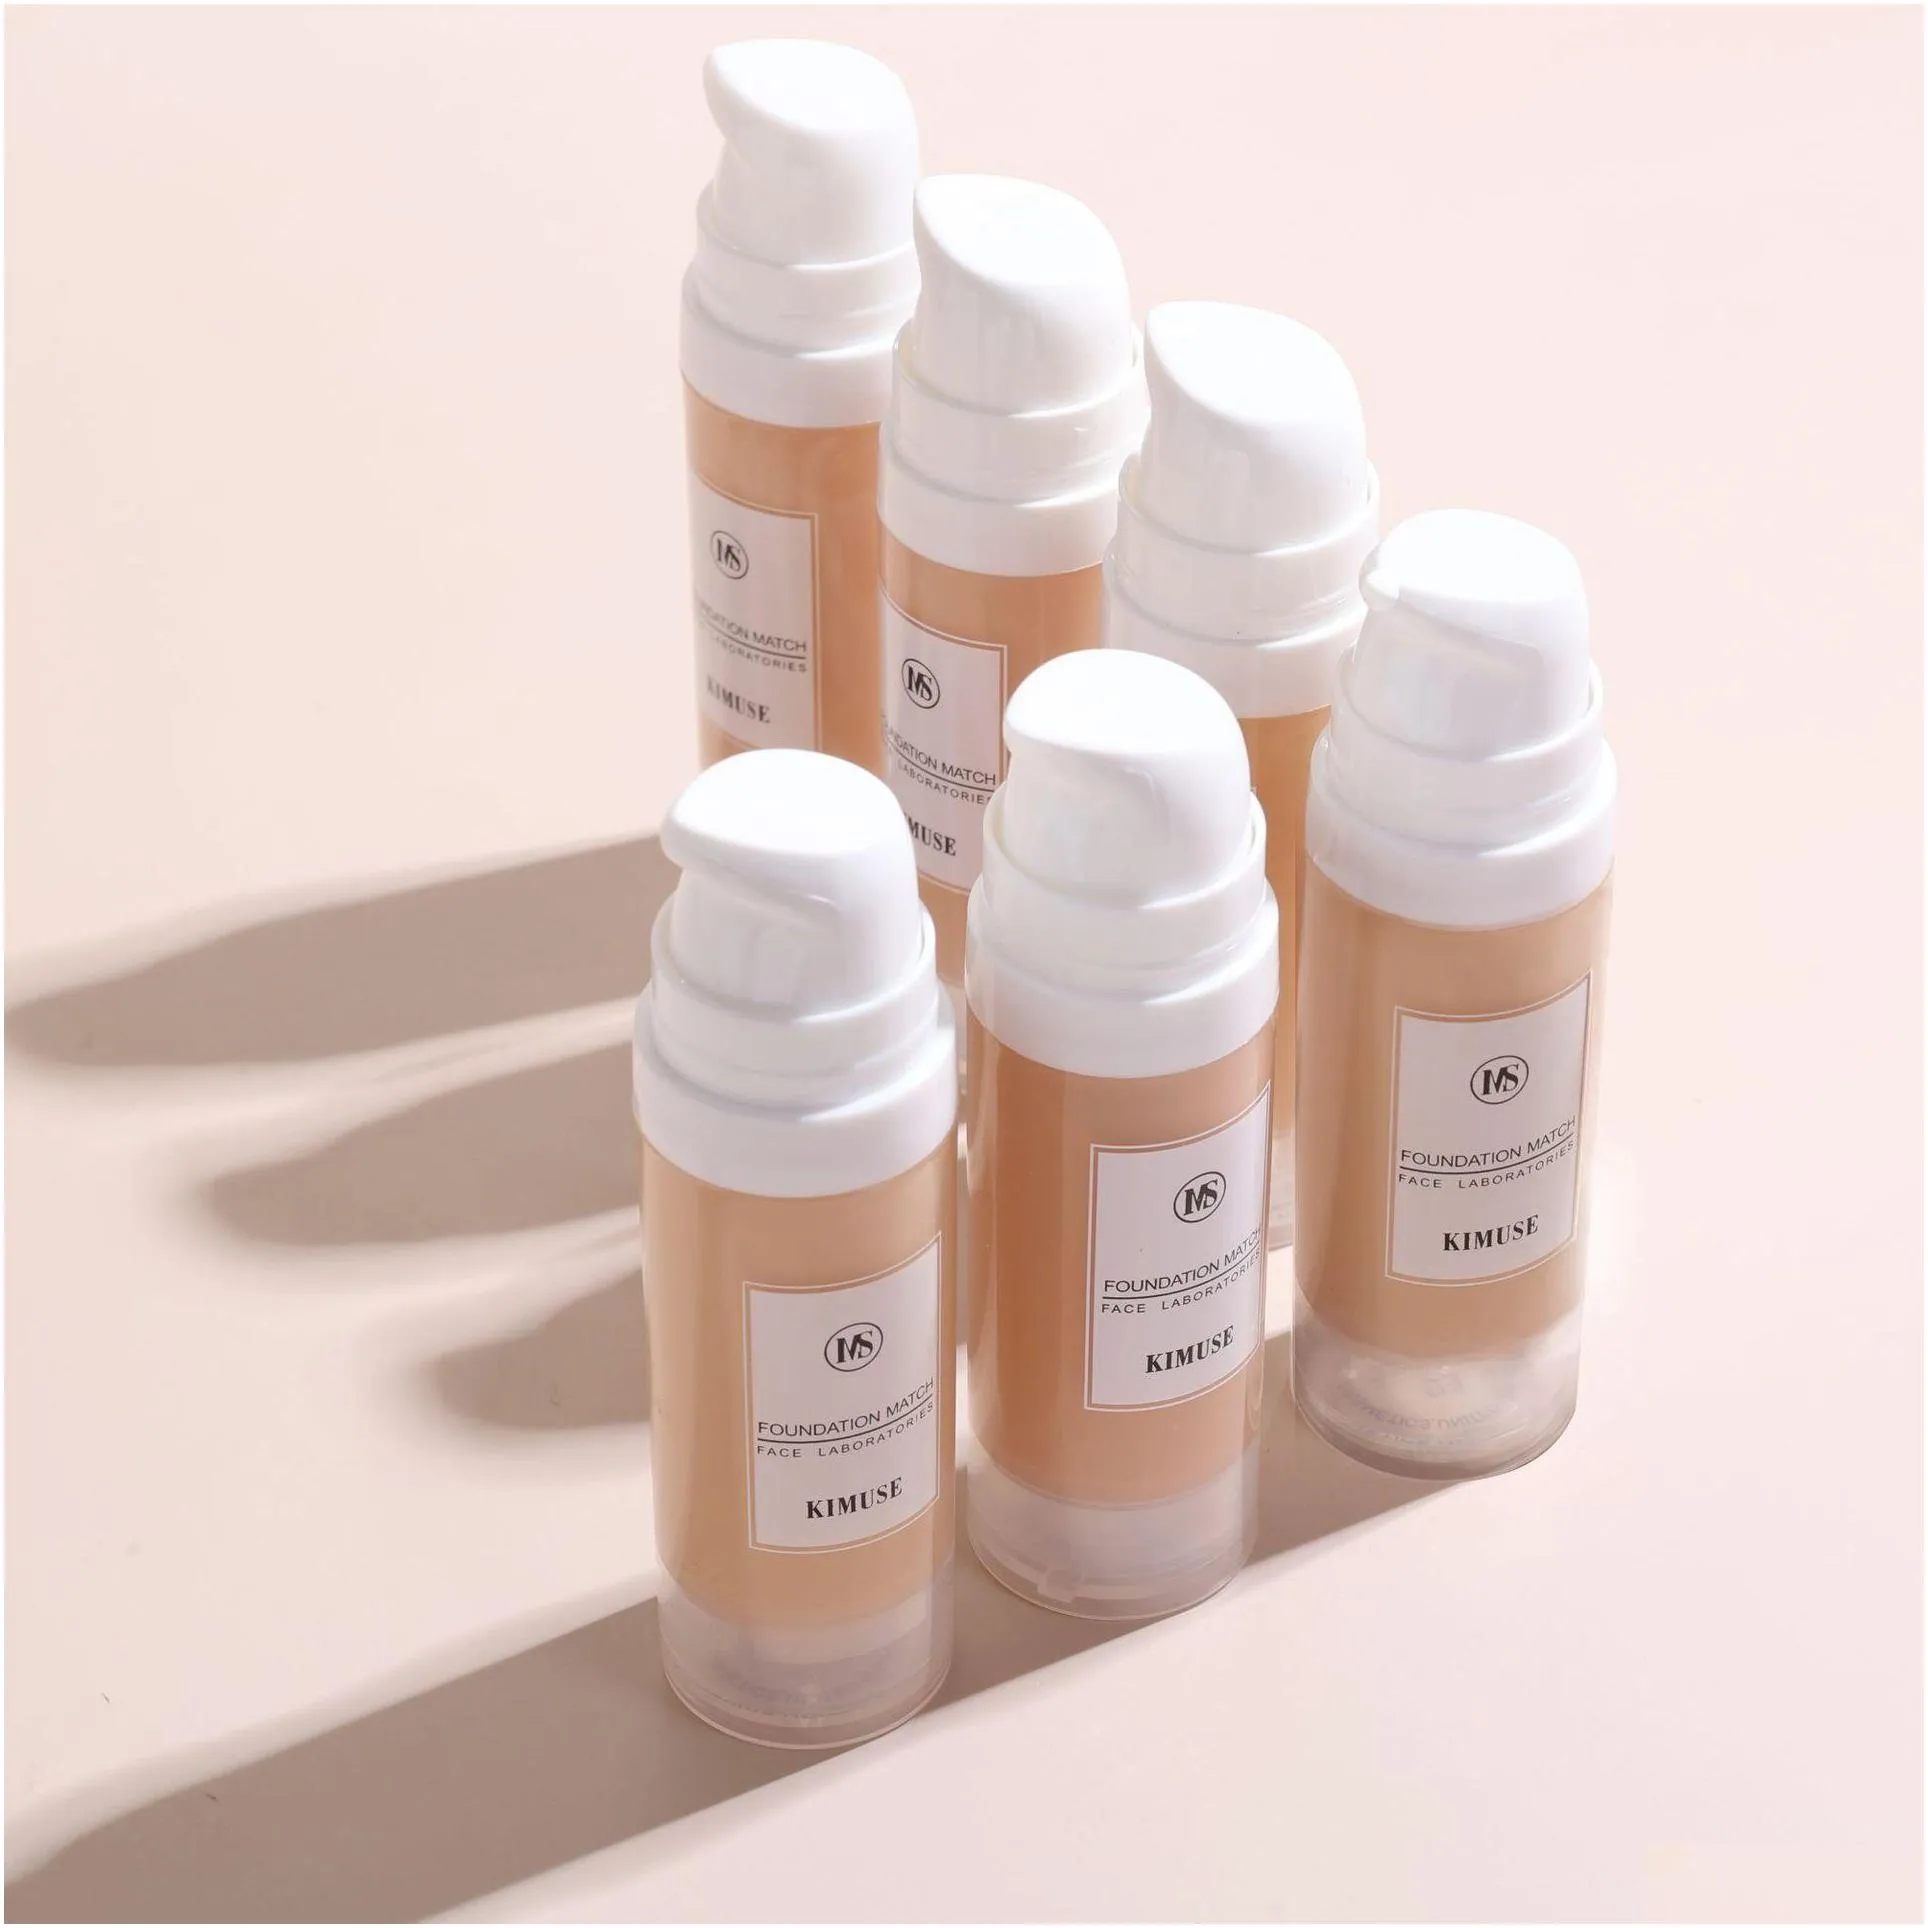 kimuse face foundation cream base makeup professional matte finish make up liquid concealer waterproof brand natural cosmetic